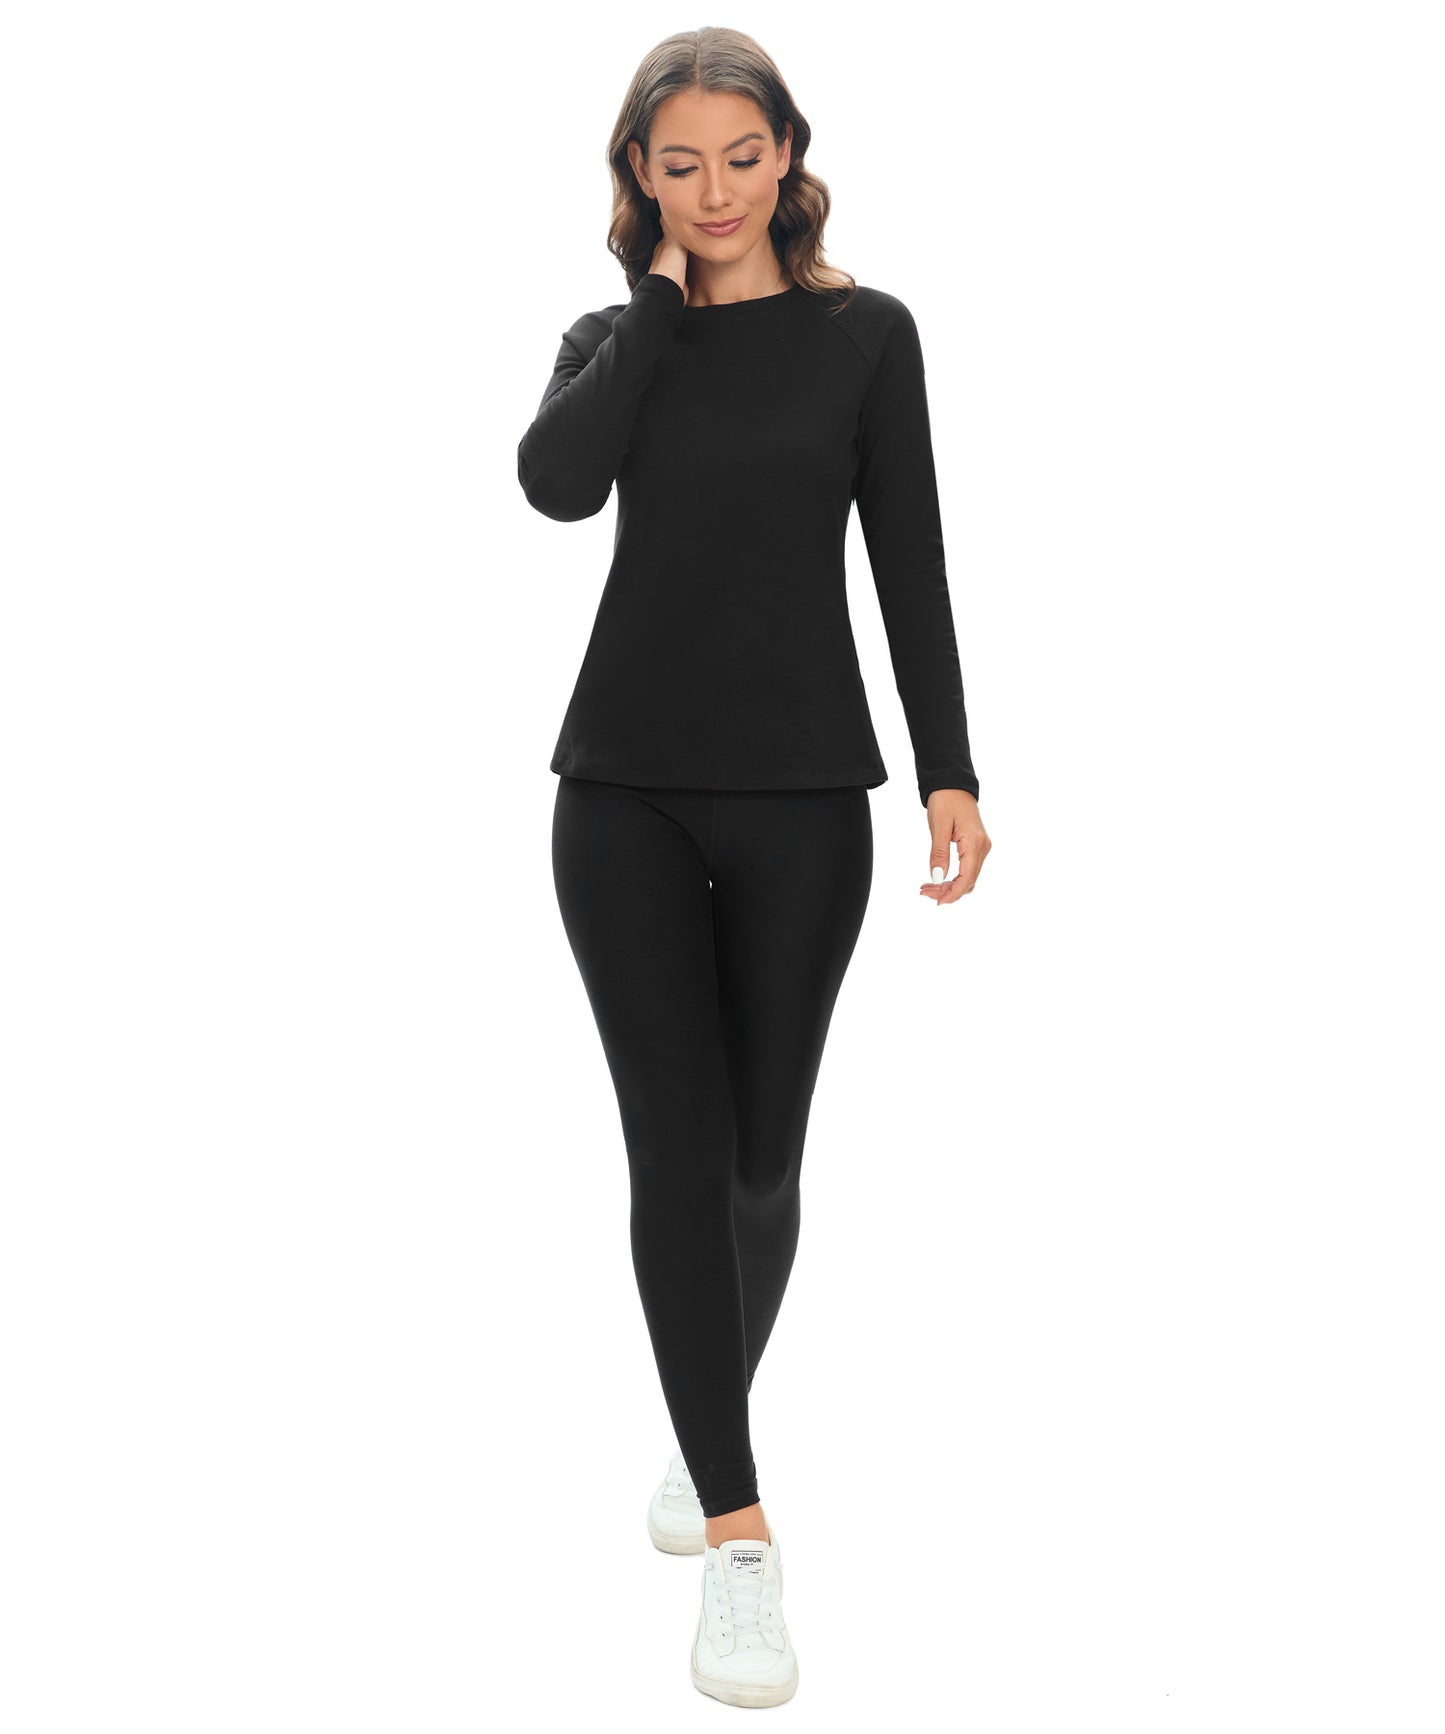 HUGE SPORTS Women Thermal Fleece Top Shirts Workout Pullover Tops Thermal Underwear Tops